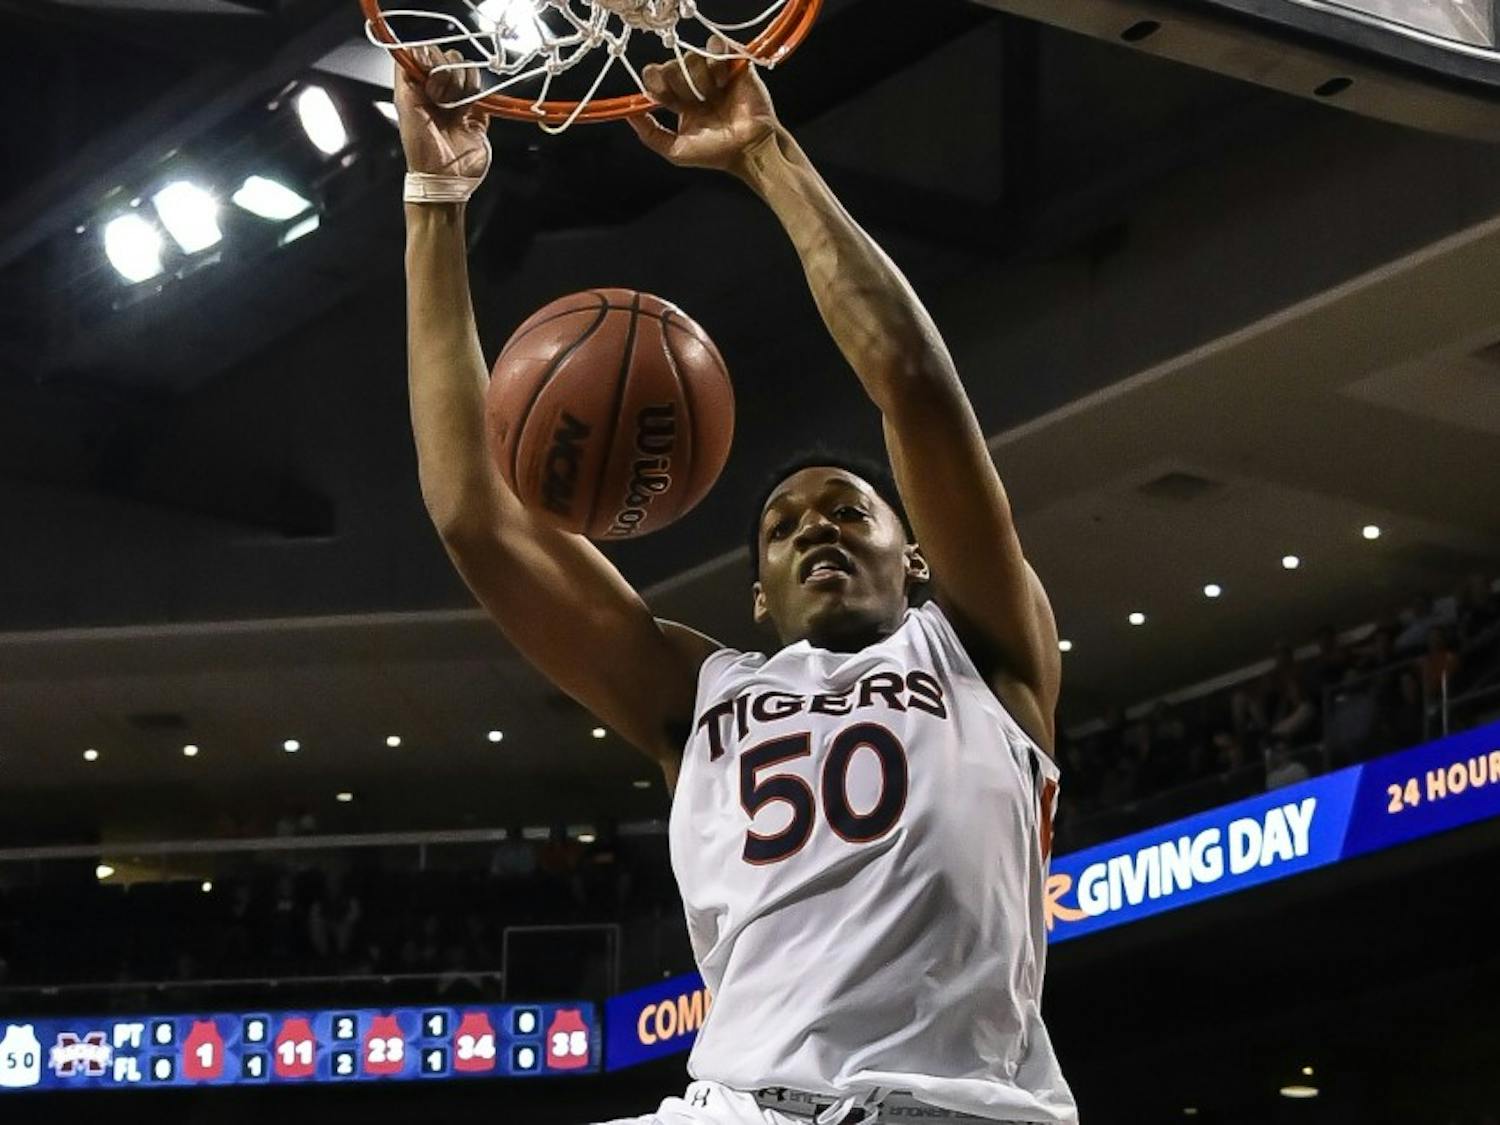 Auburn Tigers center Austin Wiley (50) dunks the ball during the first half of the Auburn vs Mississippi State basketball on Tuesday, Feb. 7, 2017, in Auburn, Ala.